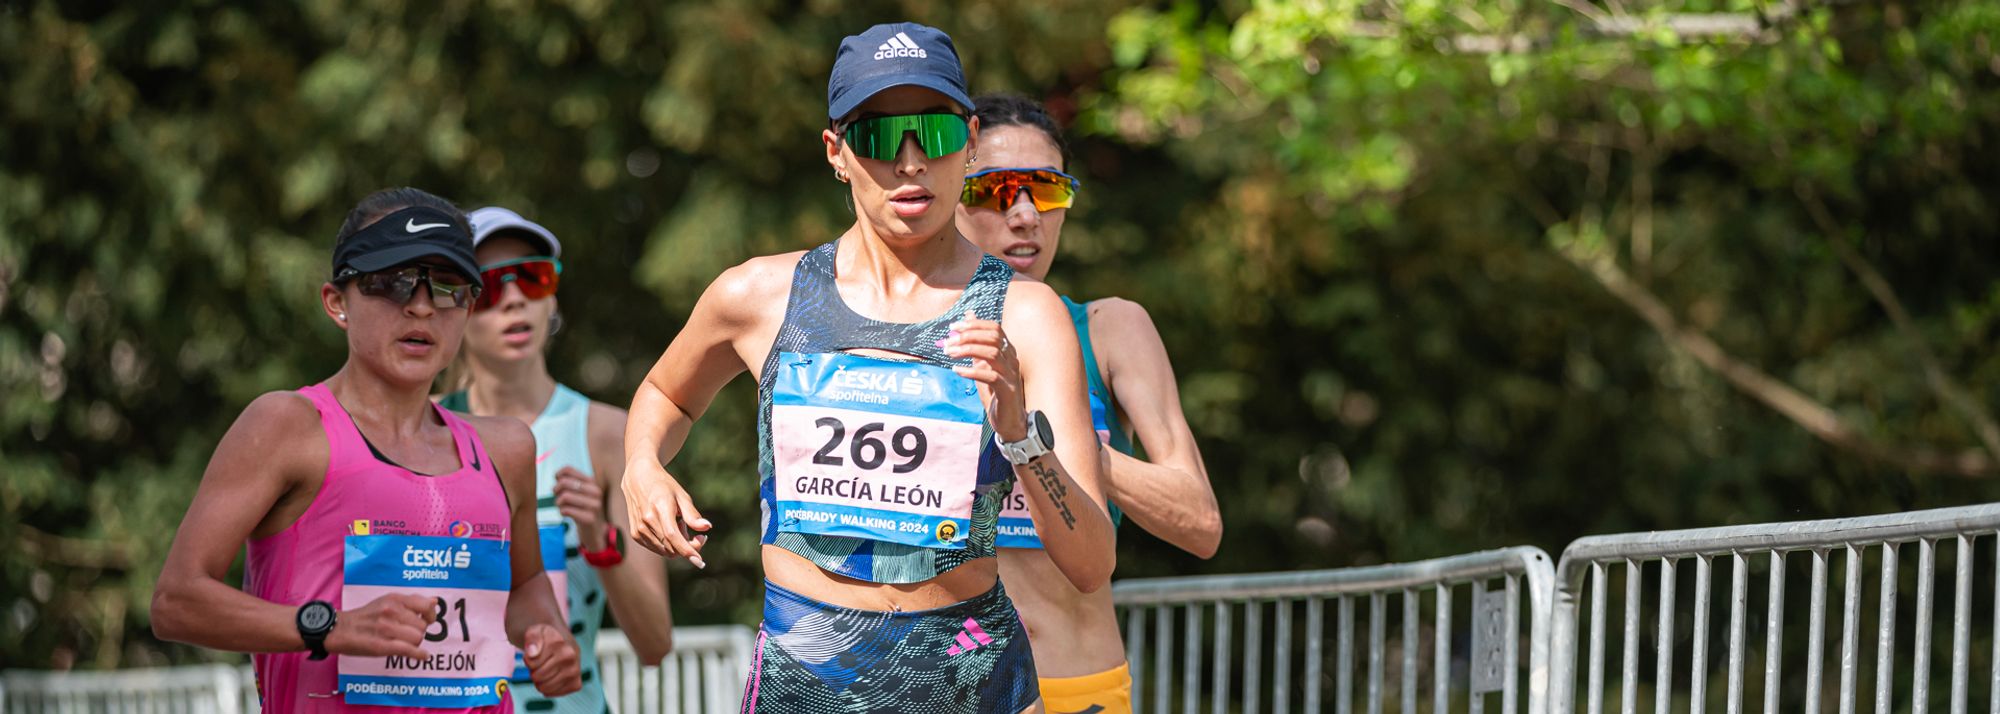 A vast array of talent will gather at the Gran Premio Cantones de Marcha – one of the two Spanish legs of this season’s World Athletics Race Walking Tour Gold – on Saturday